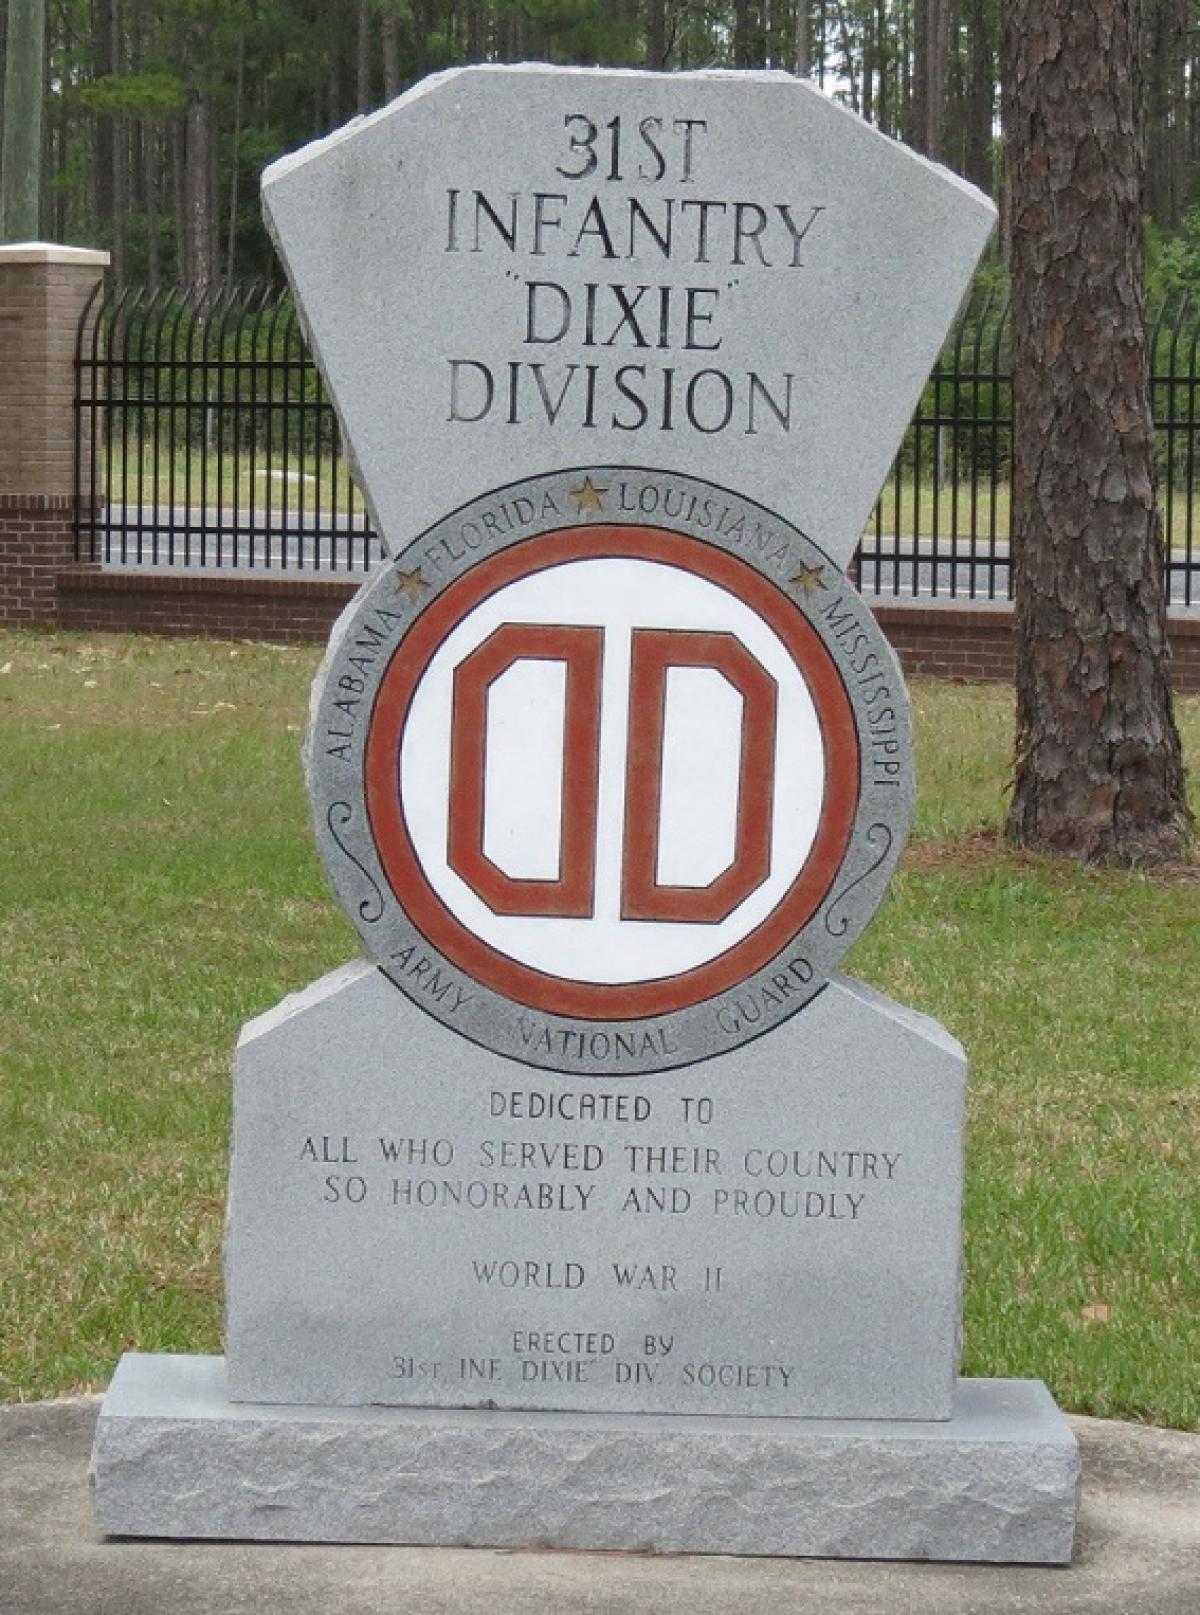 OK, Grove, Headstone Symbols and Meanings, U. S. Army 31st Infantry (Dixie Division)